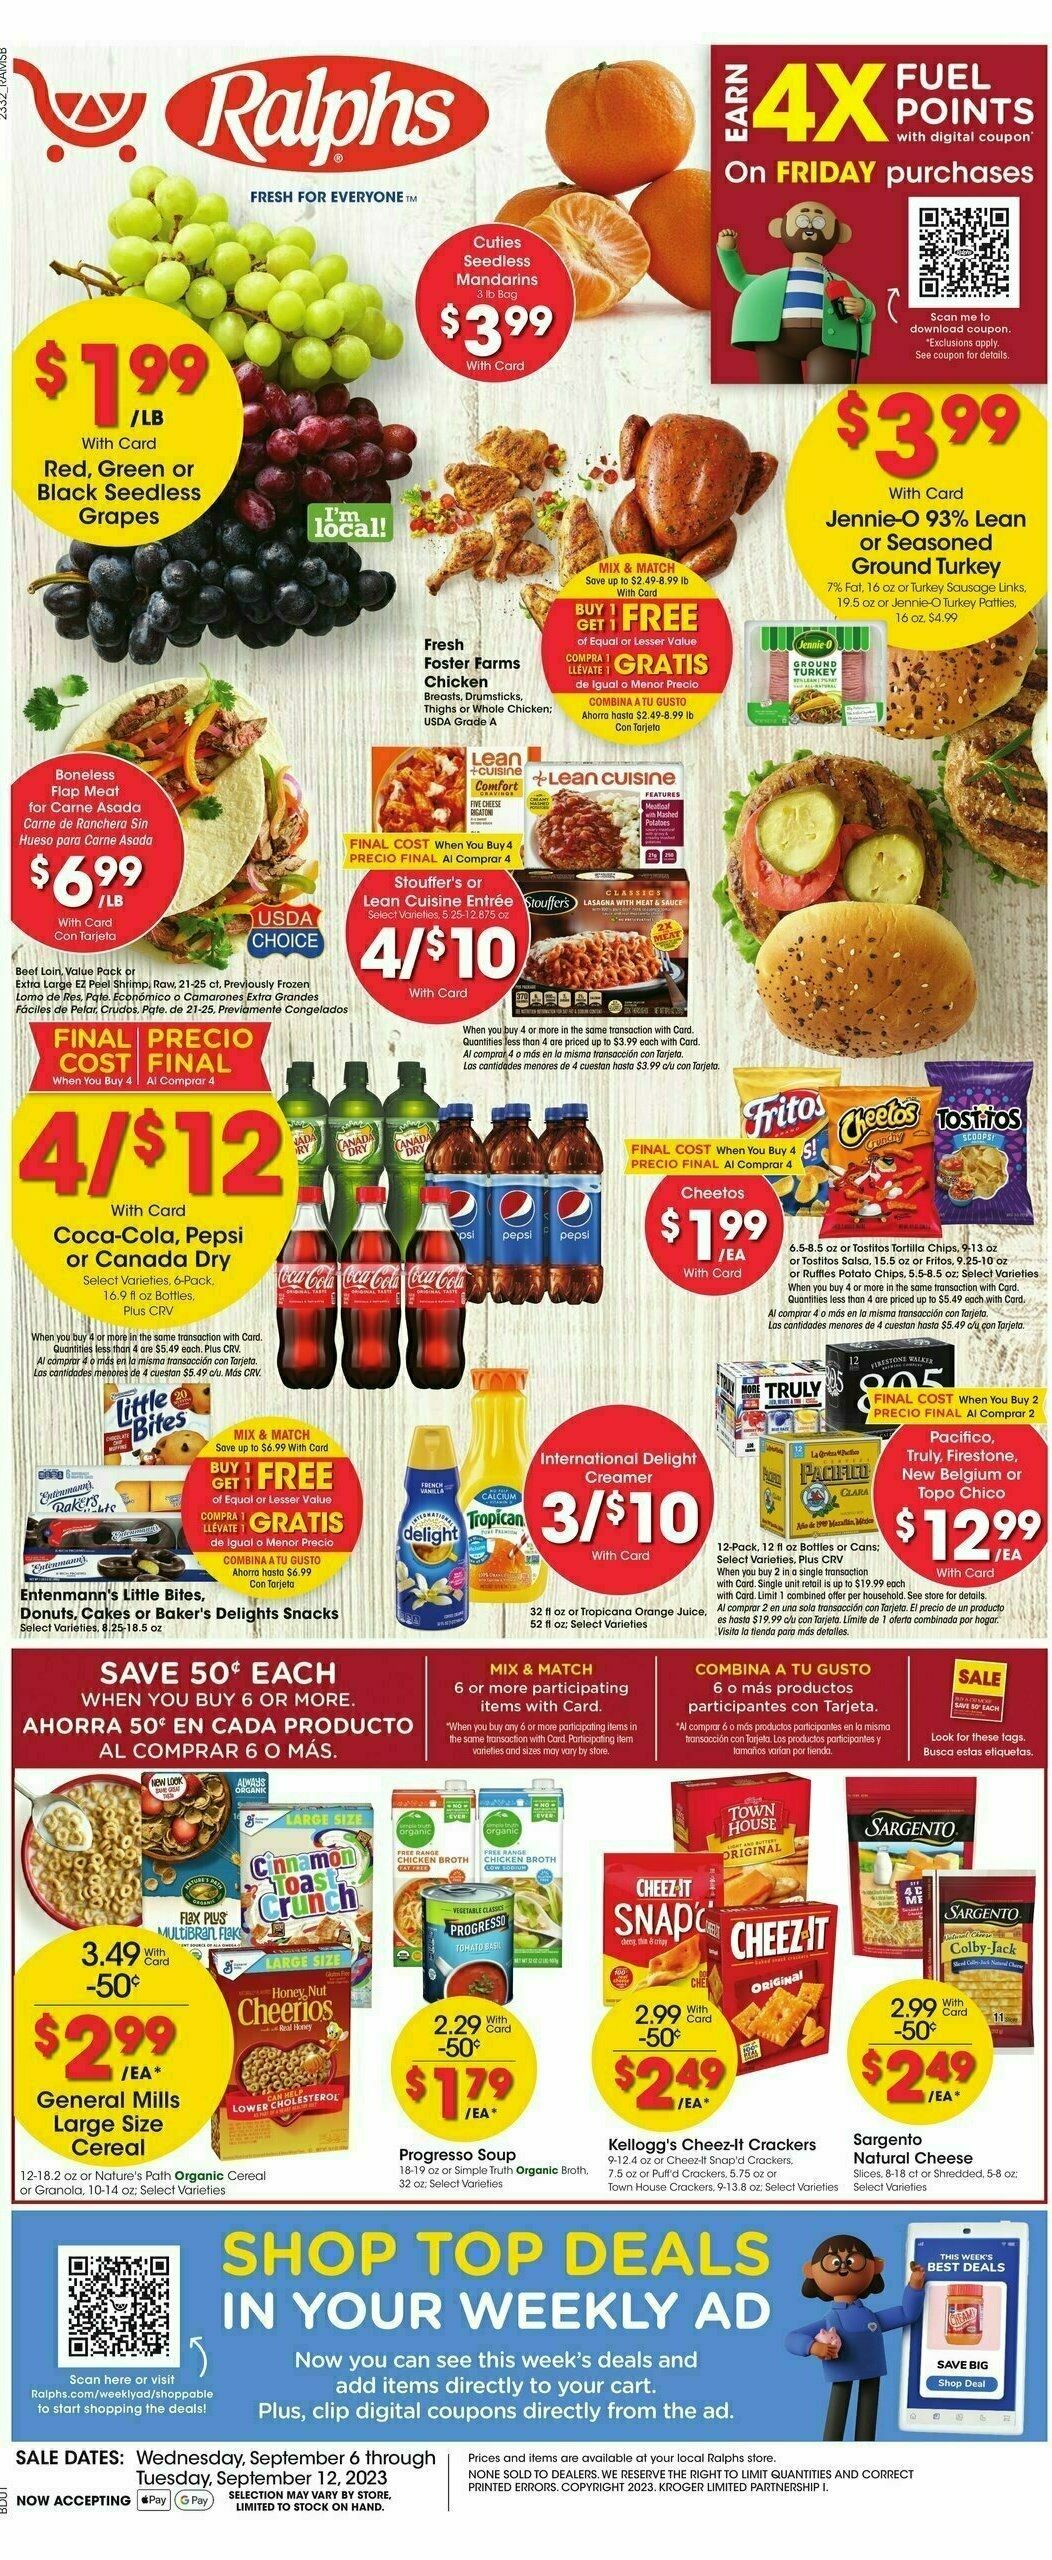 Ralphs Weekly Ad from September 6